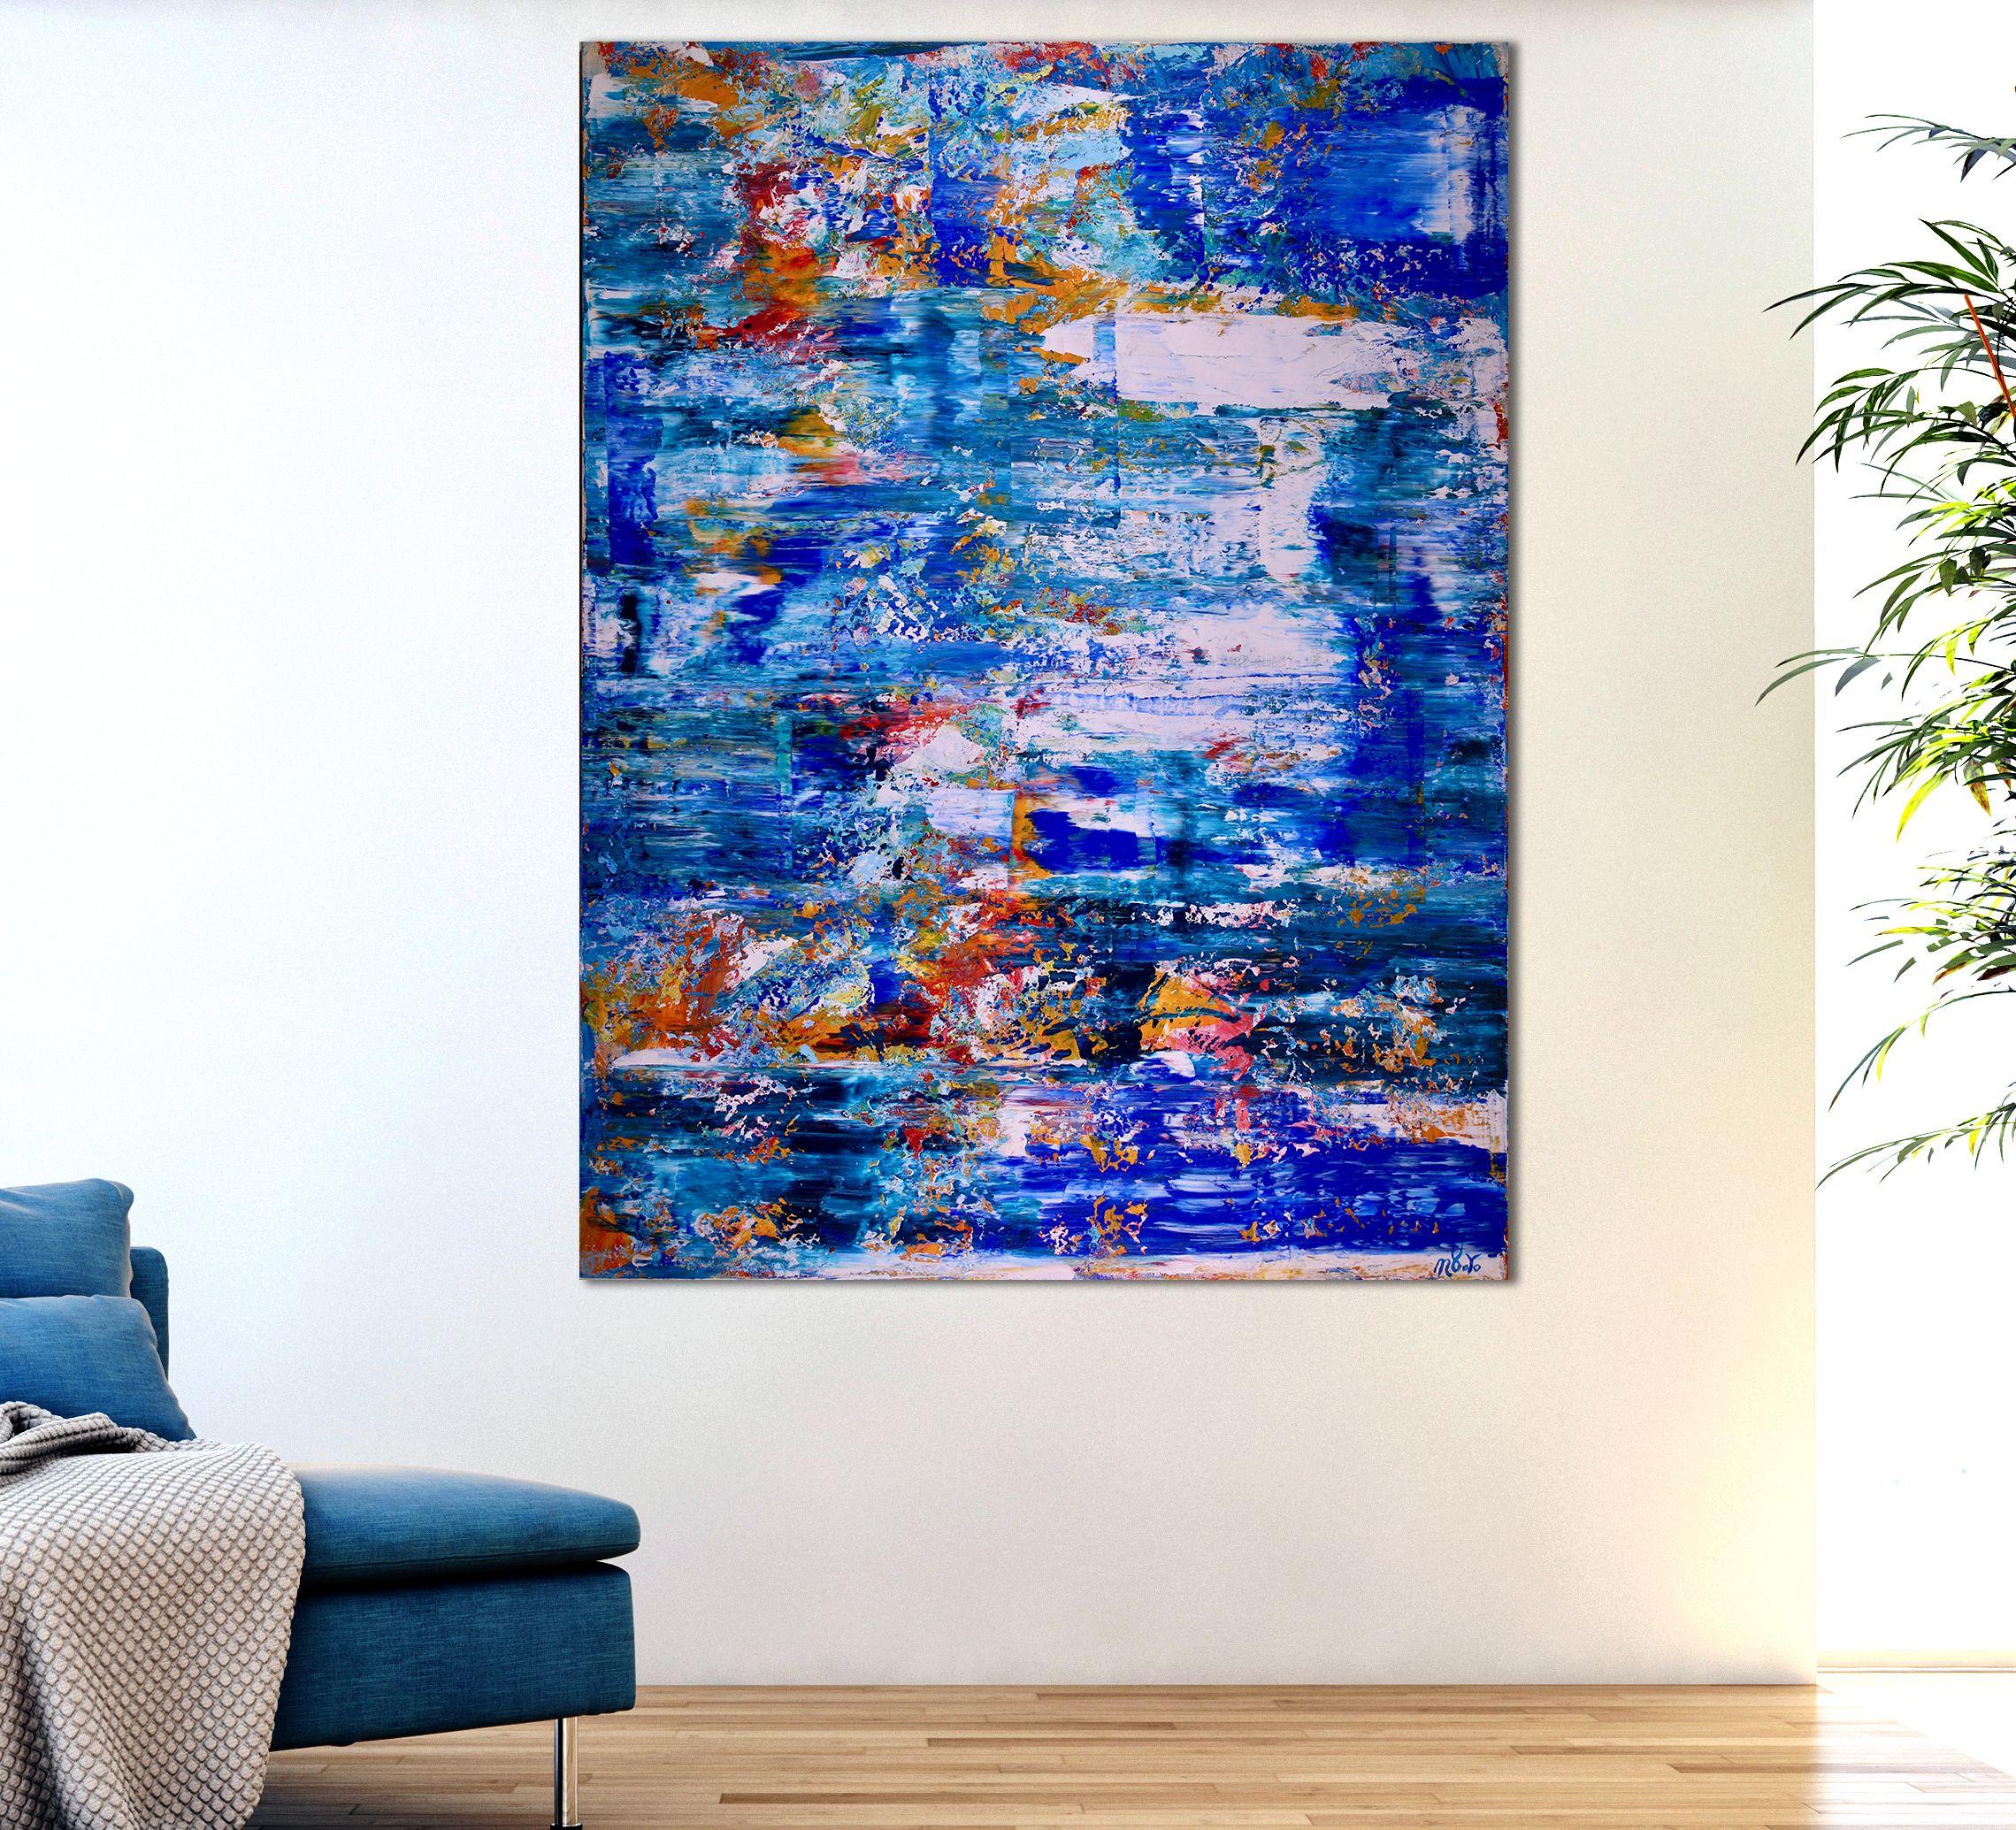 Nature inspired acrylic landscape abstract painting with beautiful details and bright color palette.Ready to hang, signed on the back. ORIGINAL FINE ABSTRACTS - ONE OF A KIND! I only make original works. Each is a one of a kind so you will have the